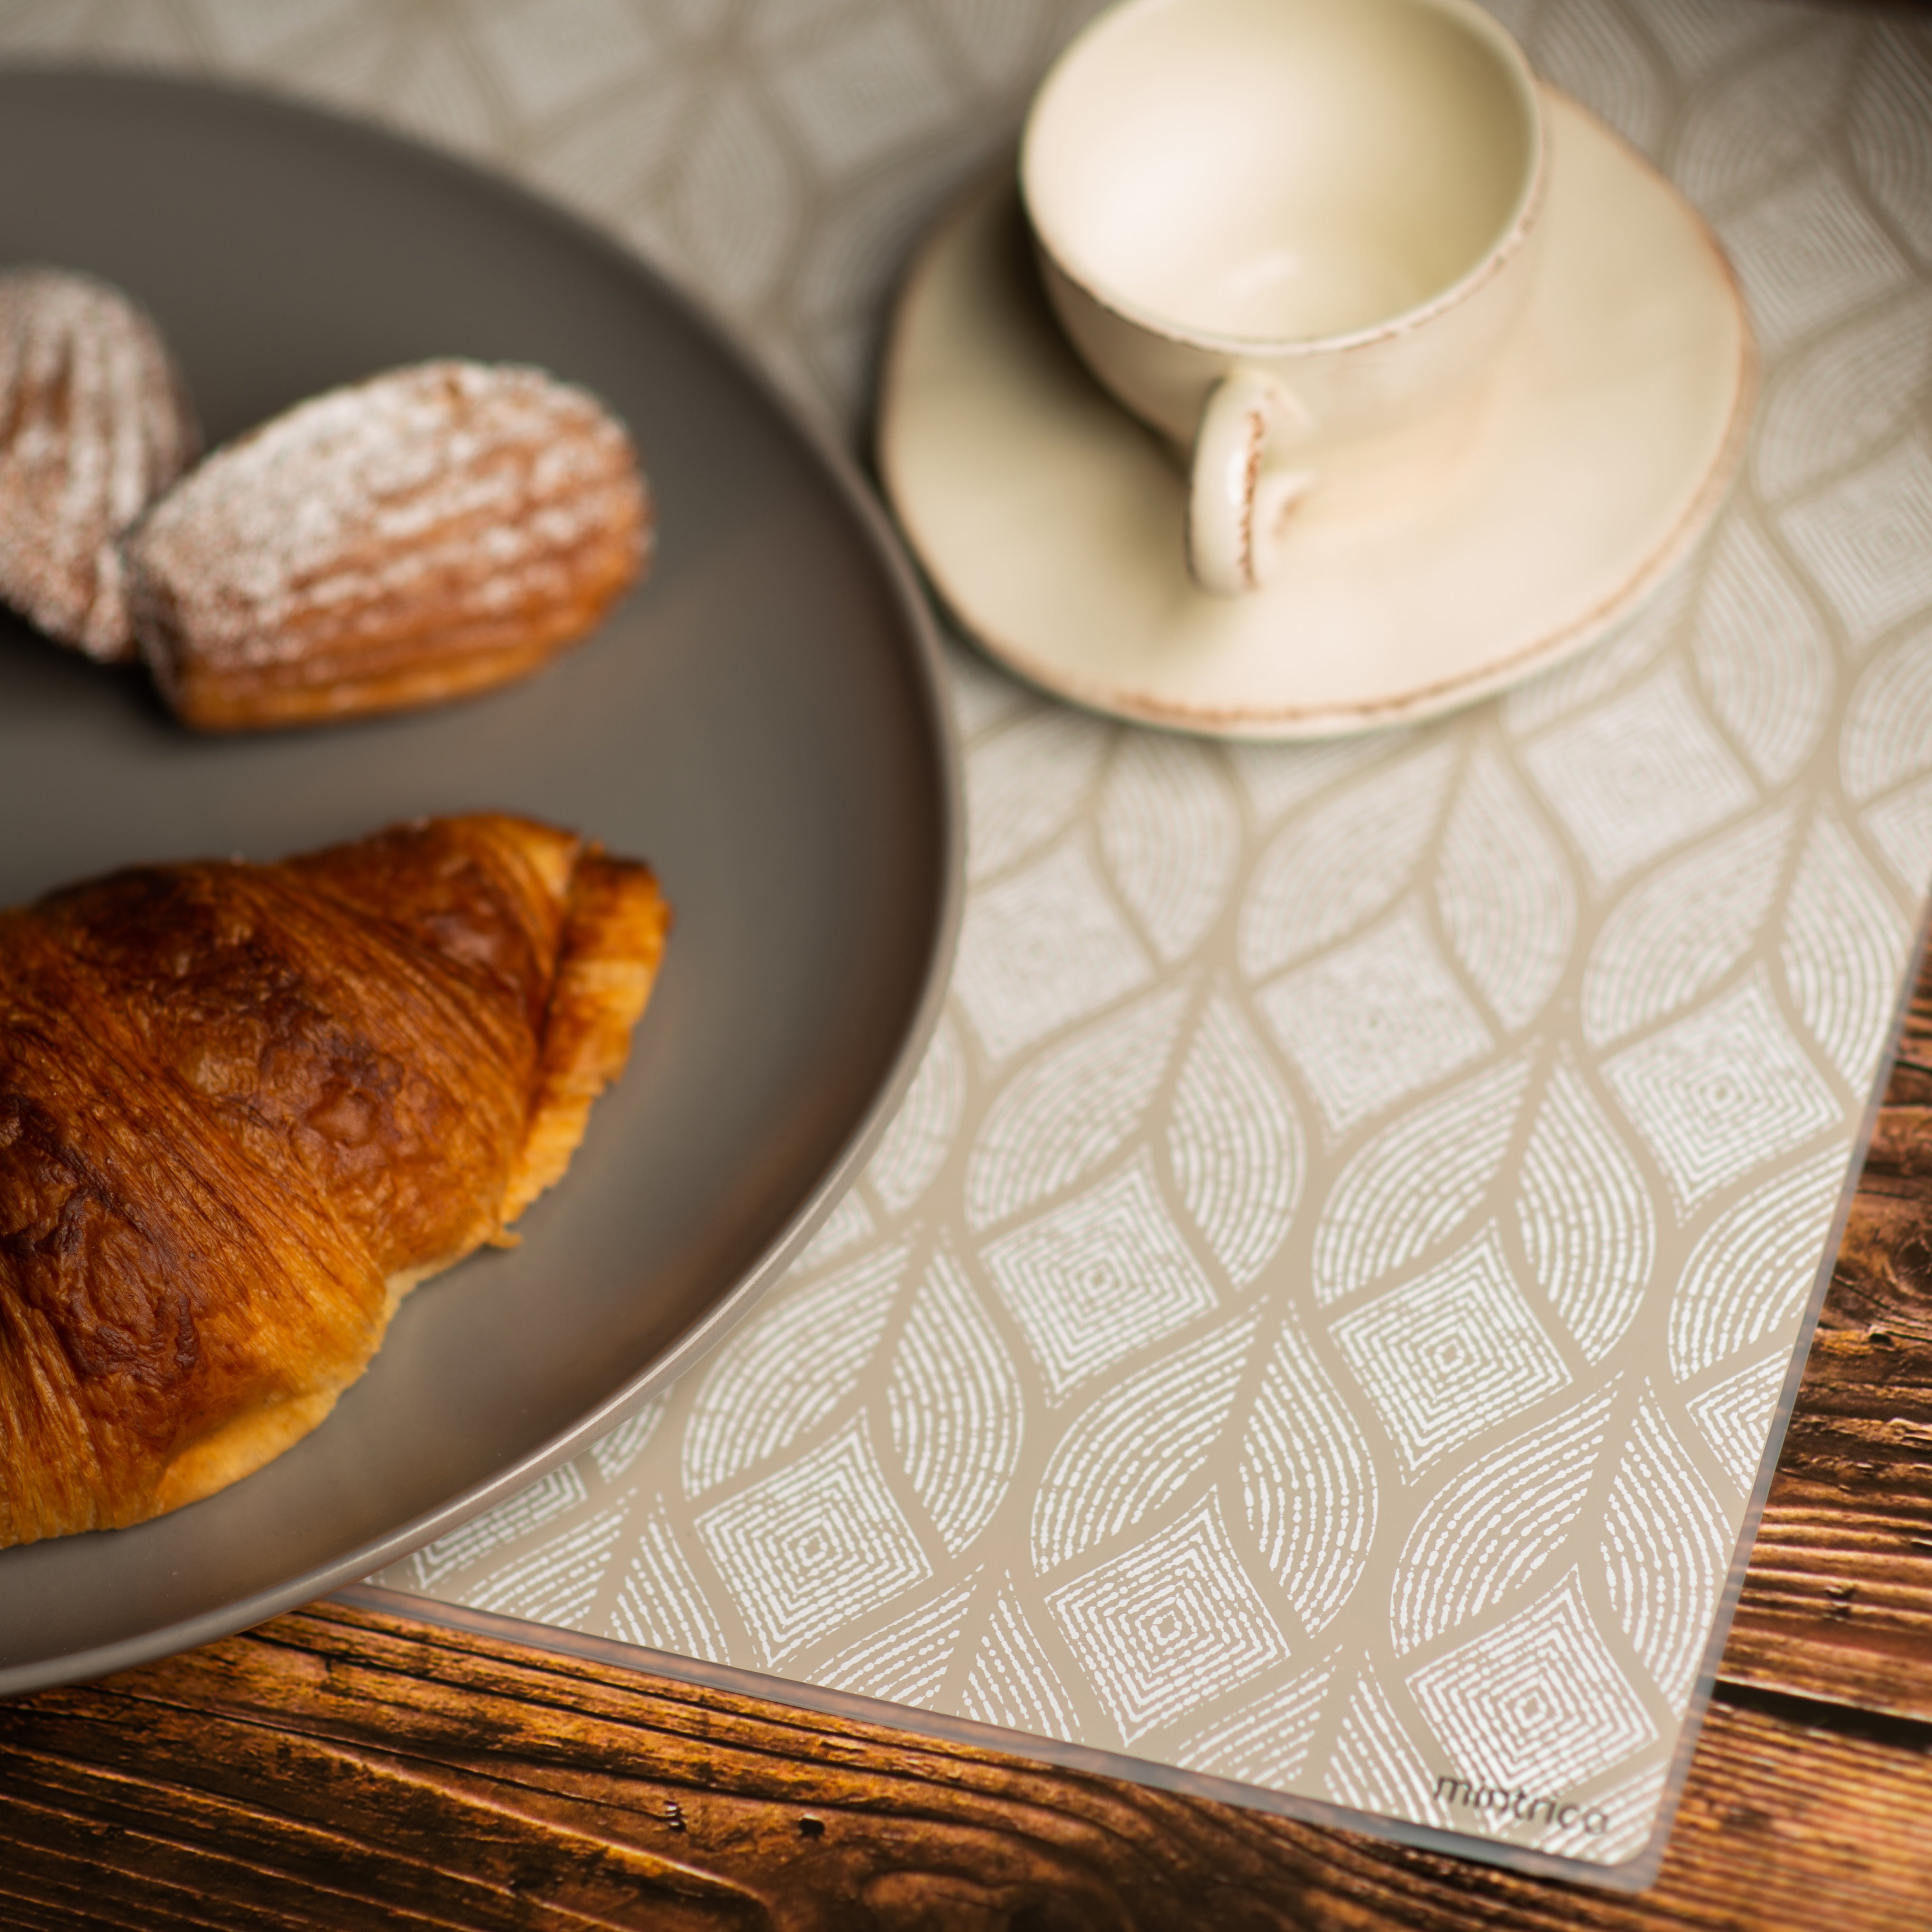 Baked goods and tea cup on silicone placemat with beige leaf pattern on wooden table